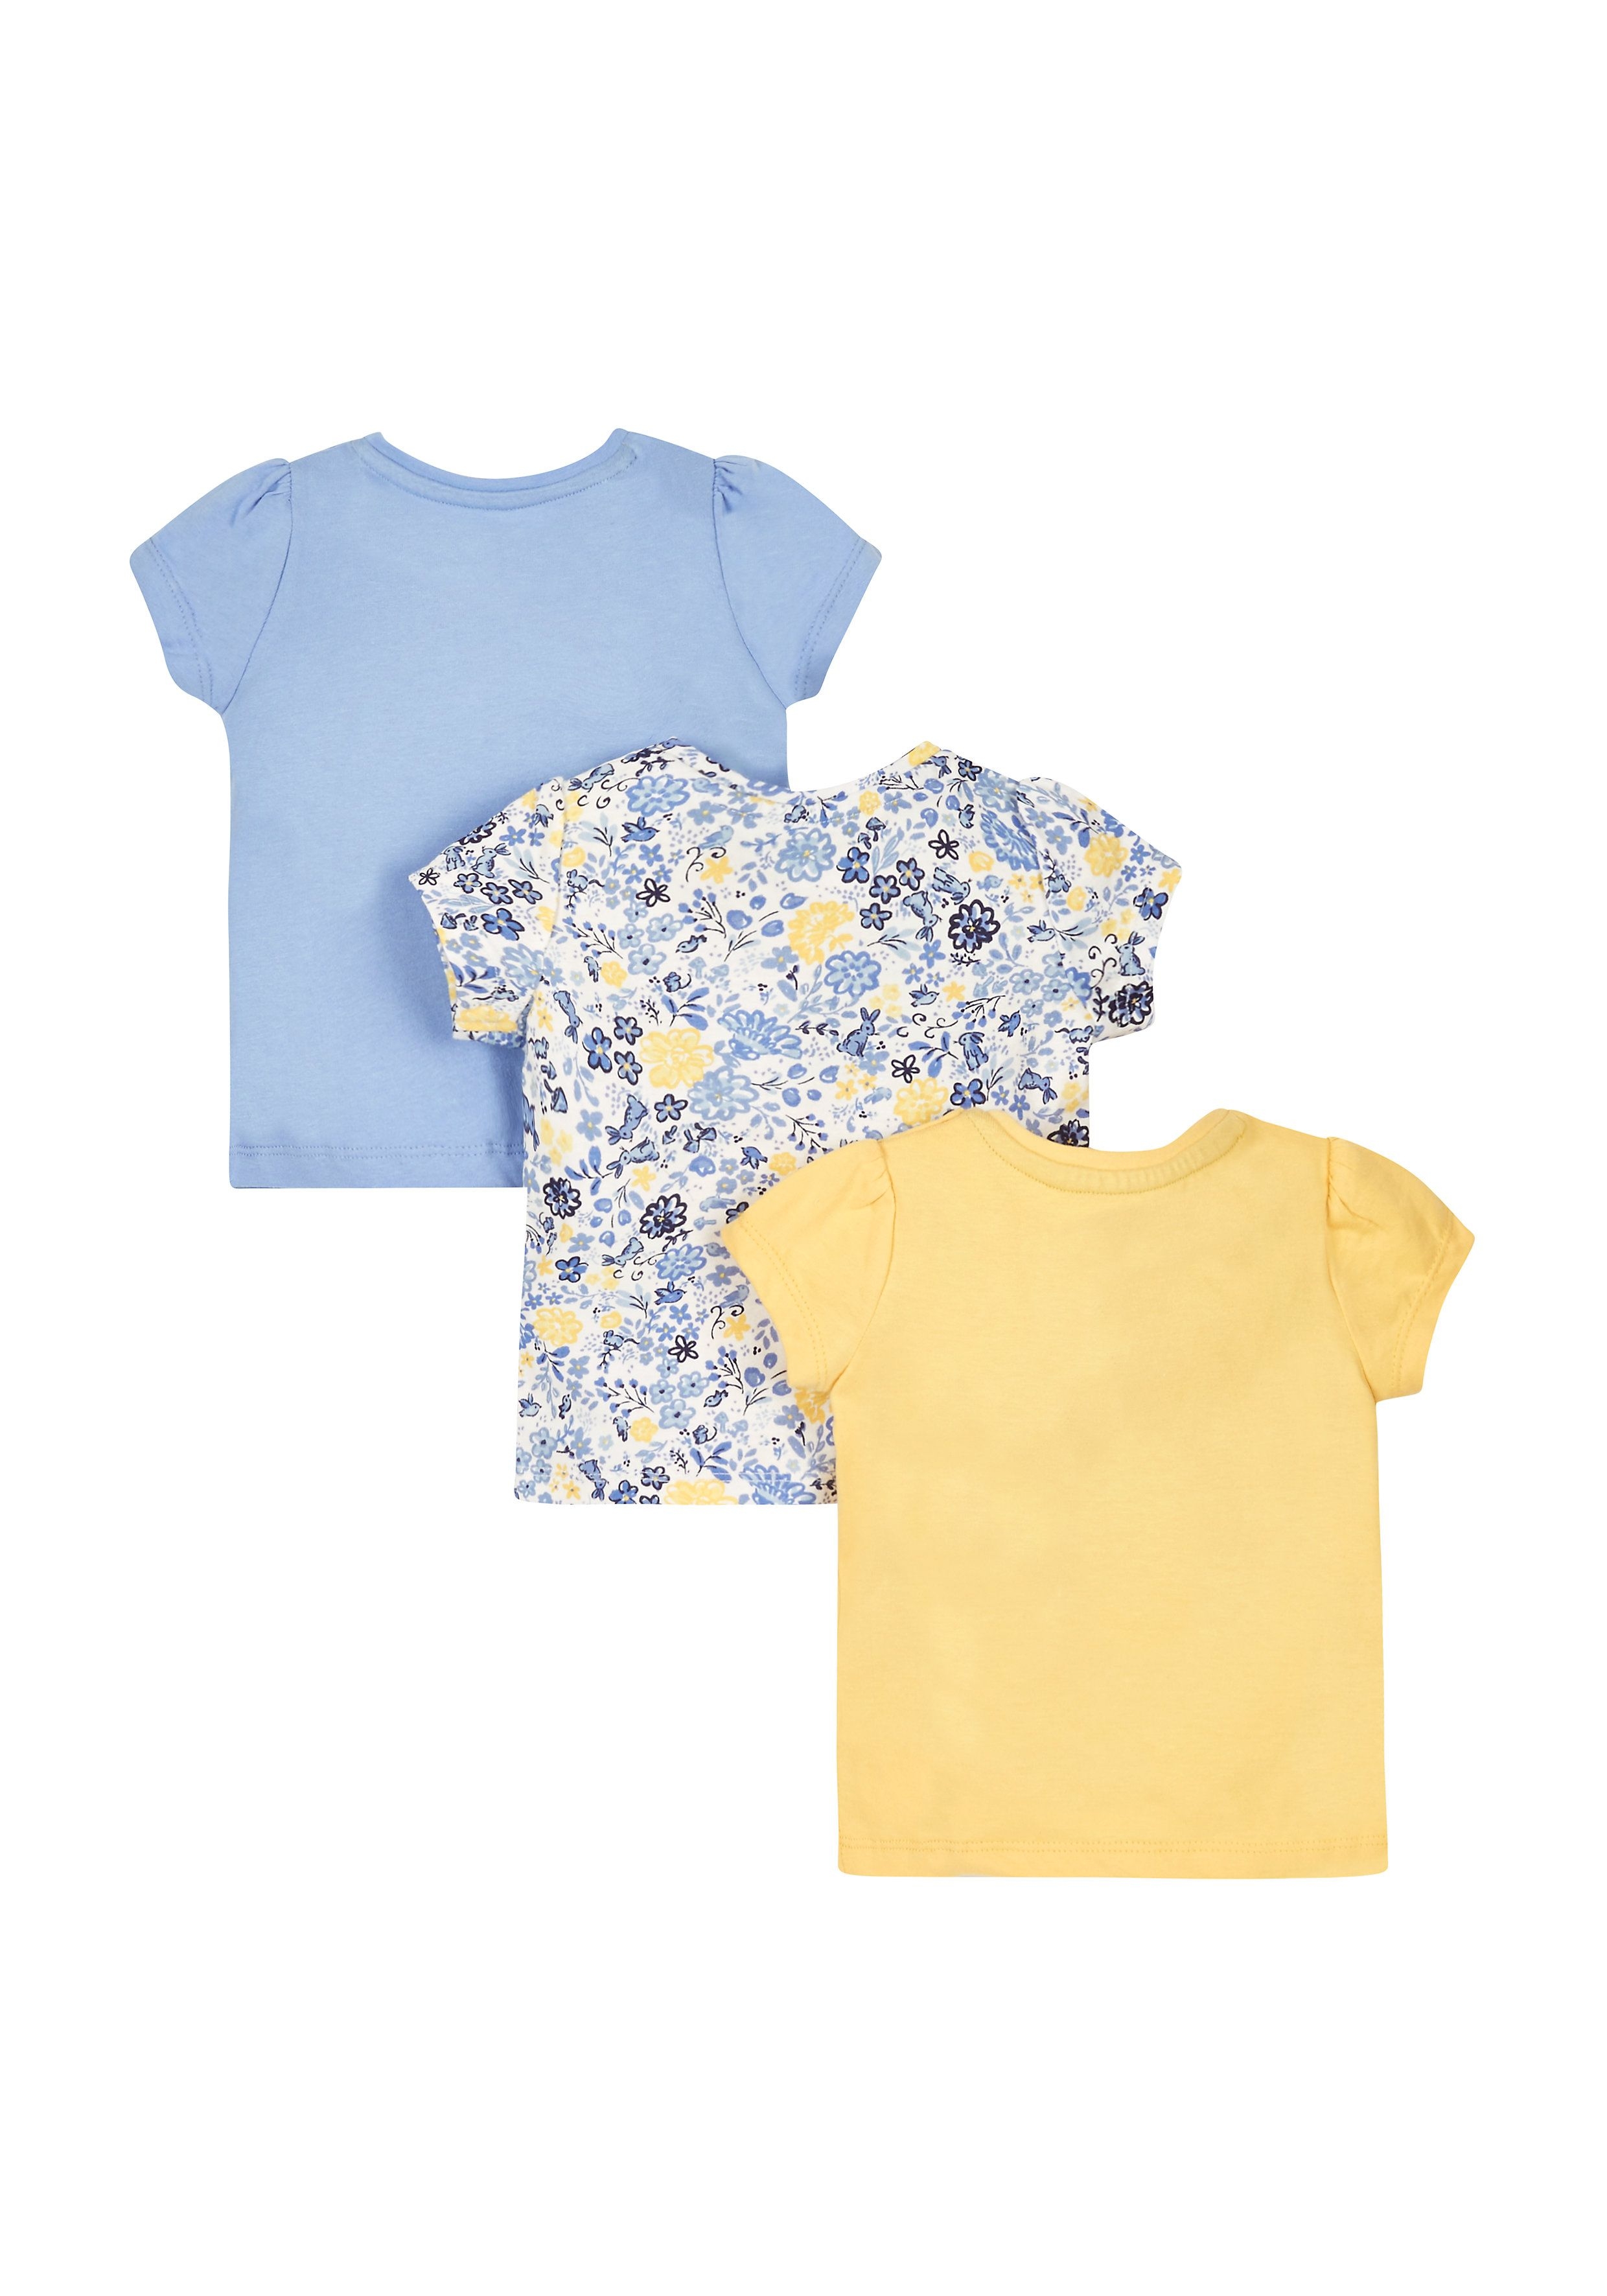 Mothercare | Bunny And Floral T-Shirts - 3 Pack 1